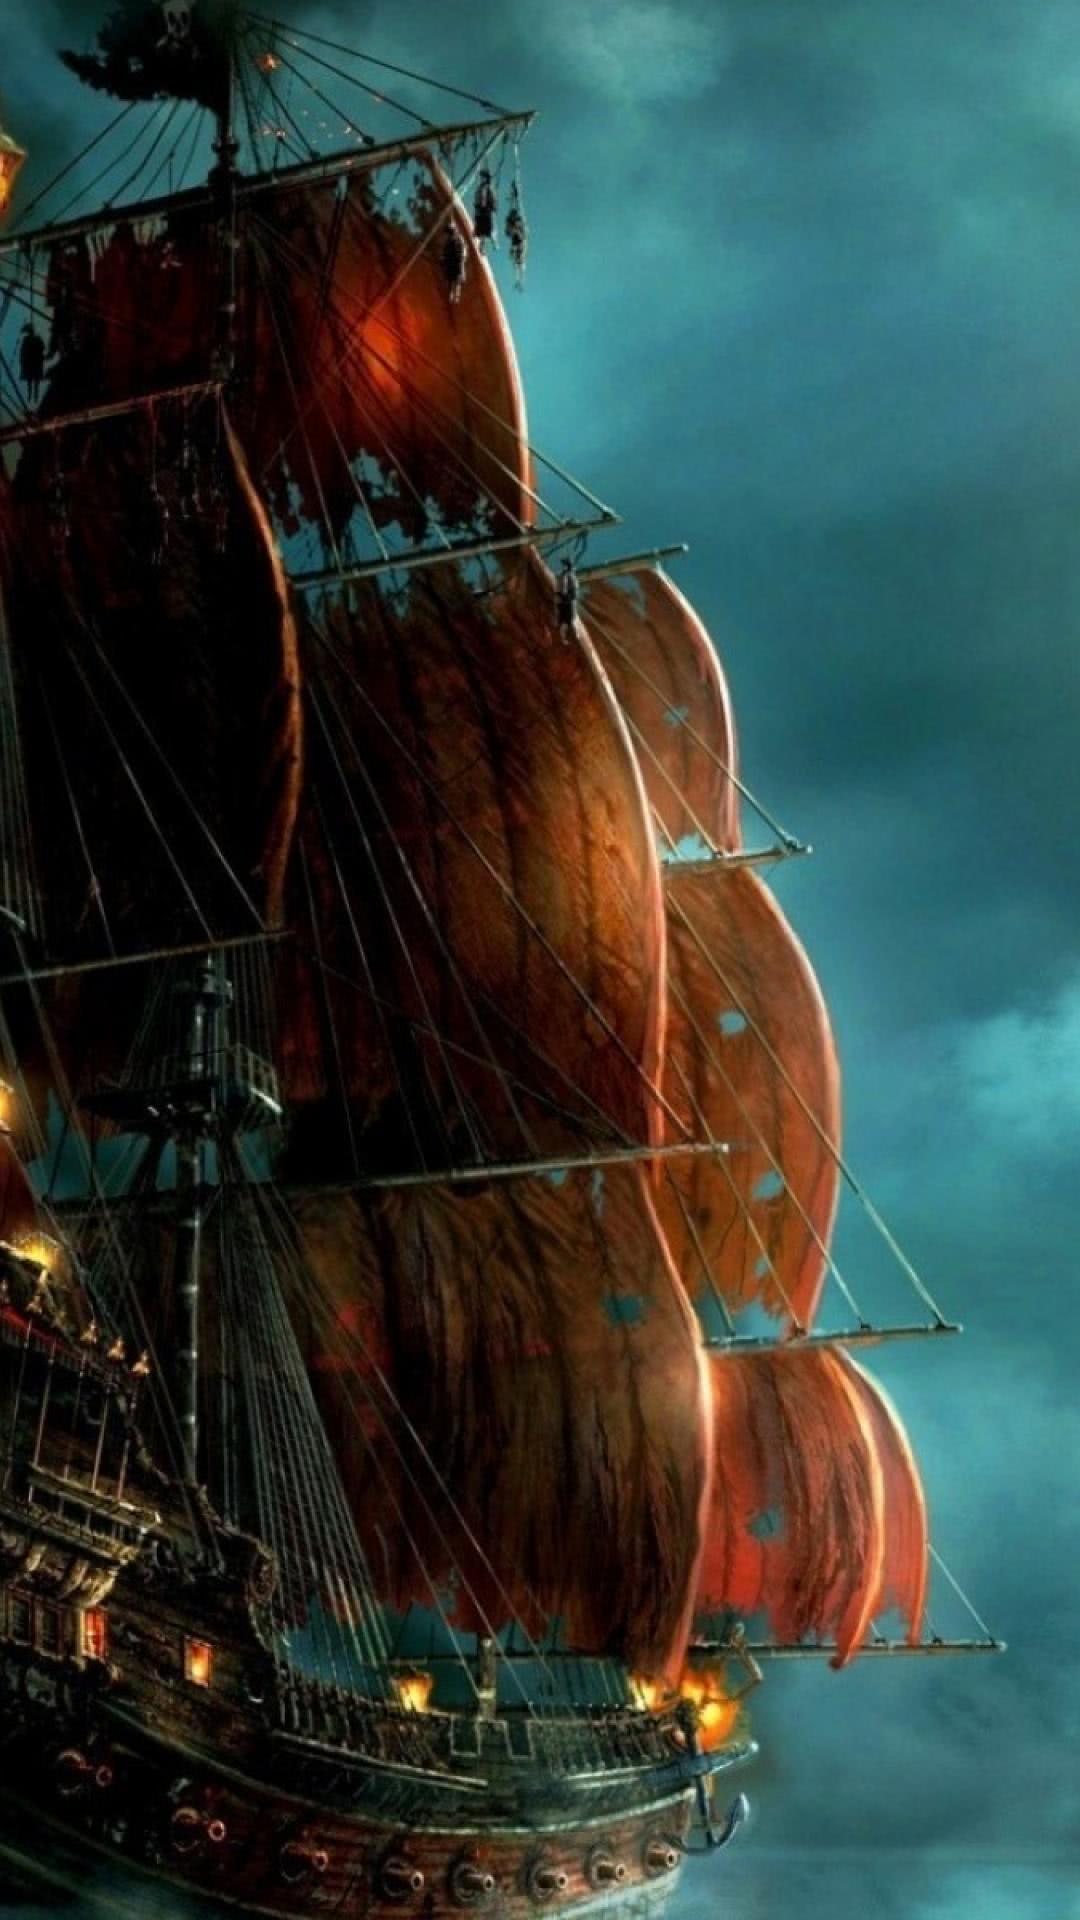 Pirate Ship Wallpapers For Desktop 65 images